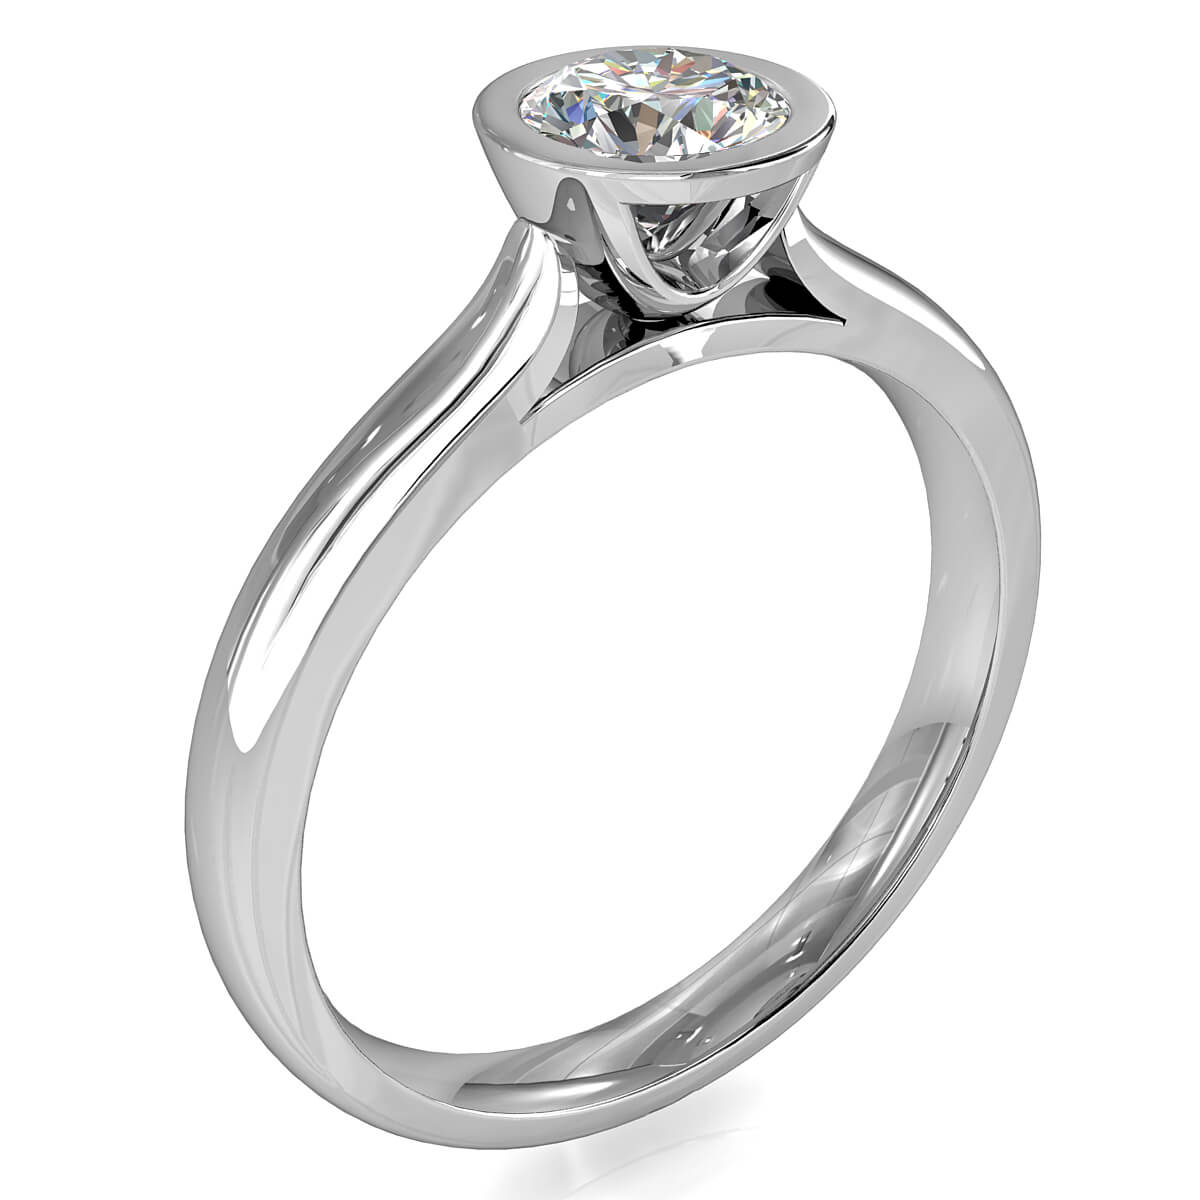 Round Brilliant Cut Solitaire Diamond Engagement Ring, Bezel Set on a Half Domed Band with Classic Open Undersetting.